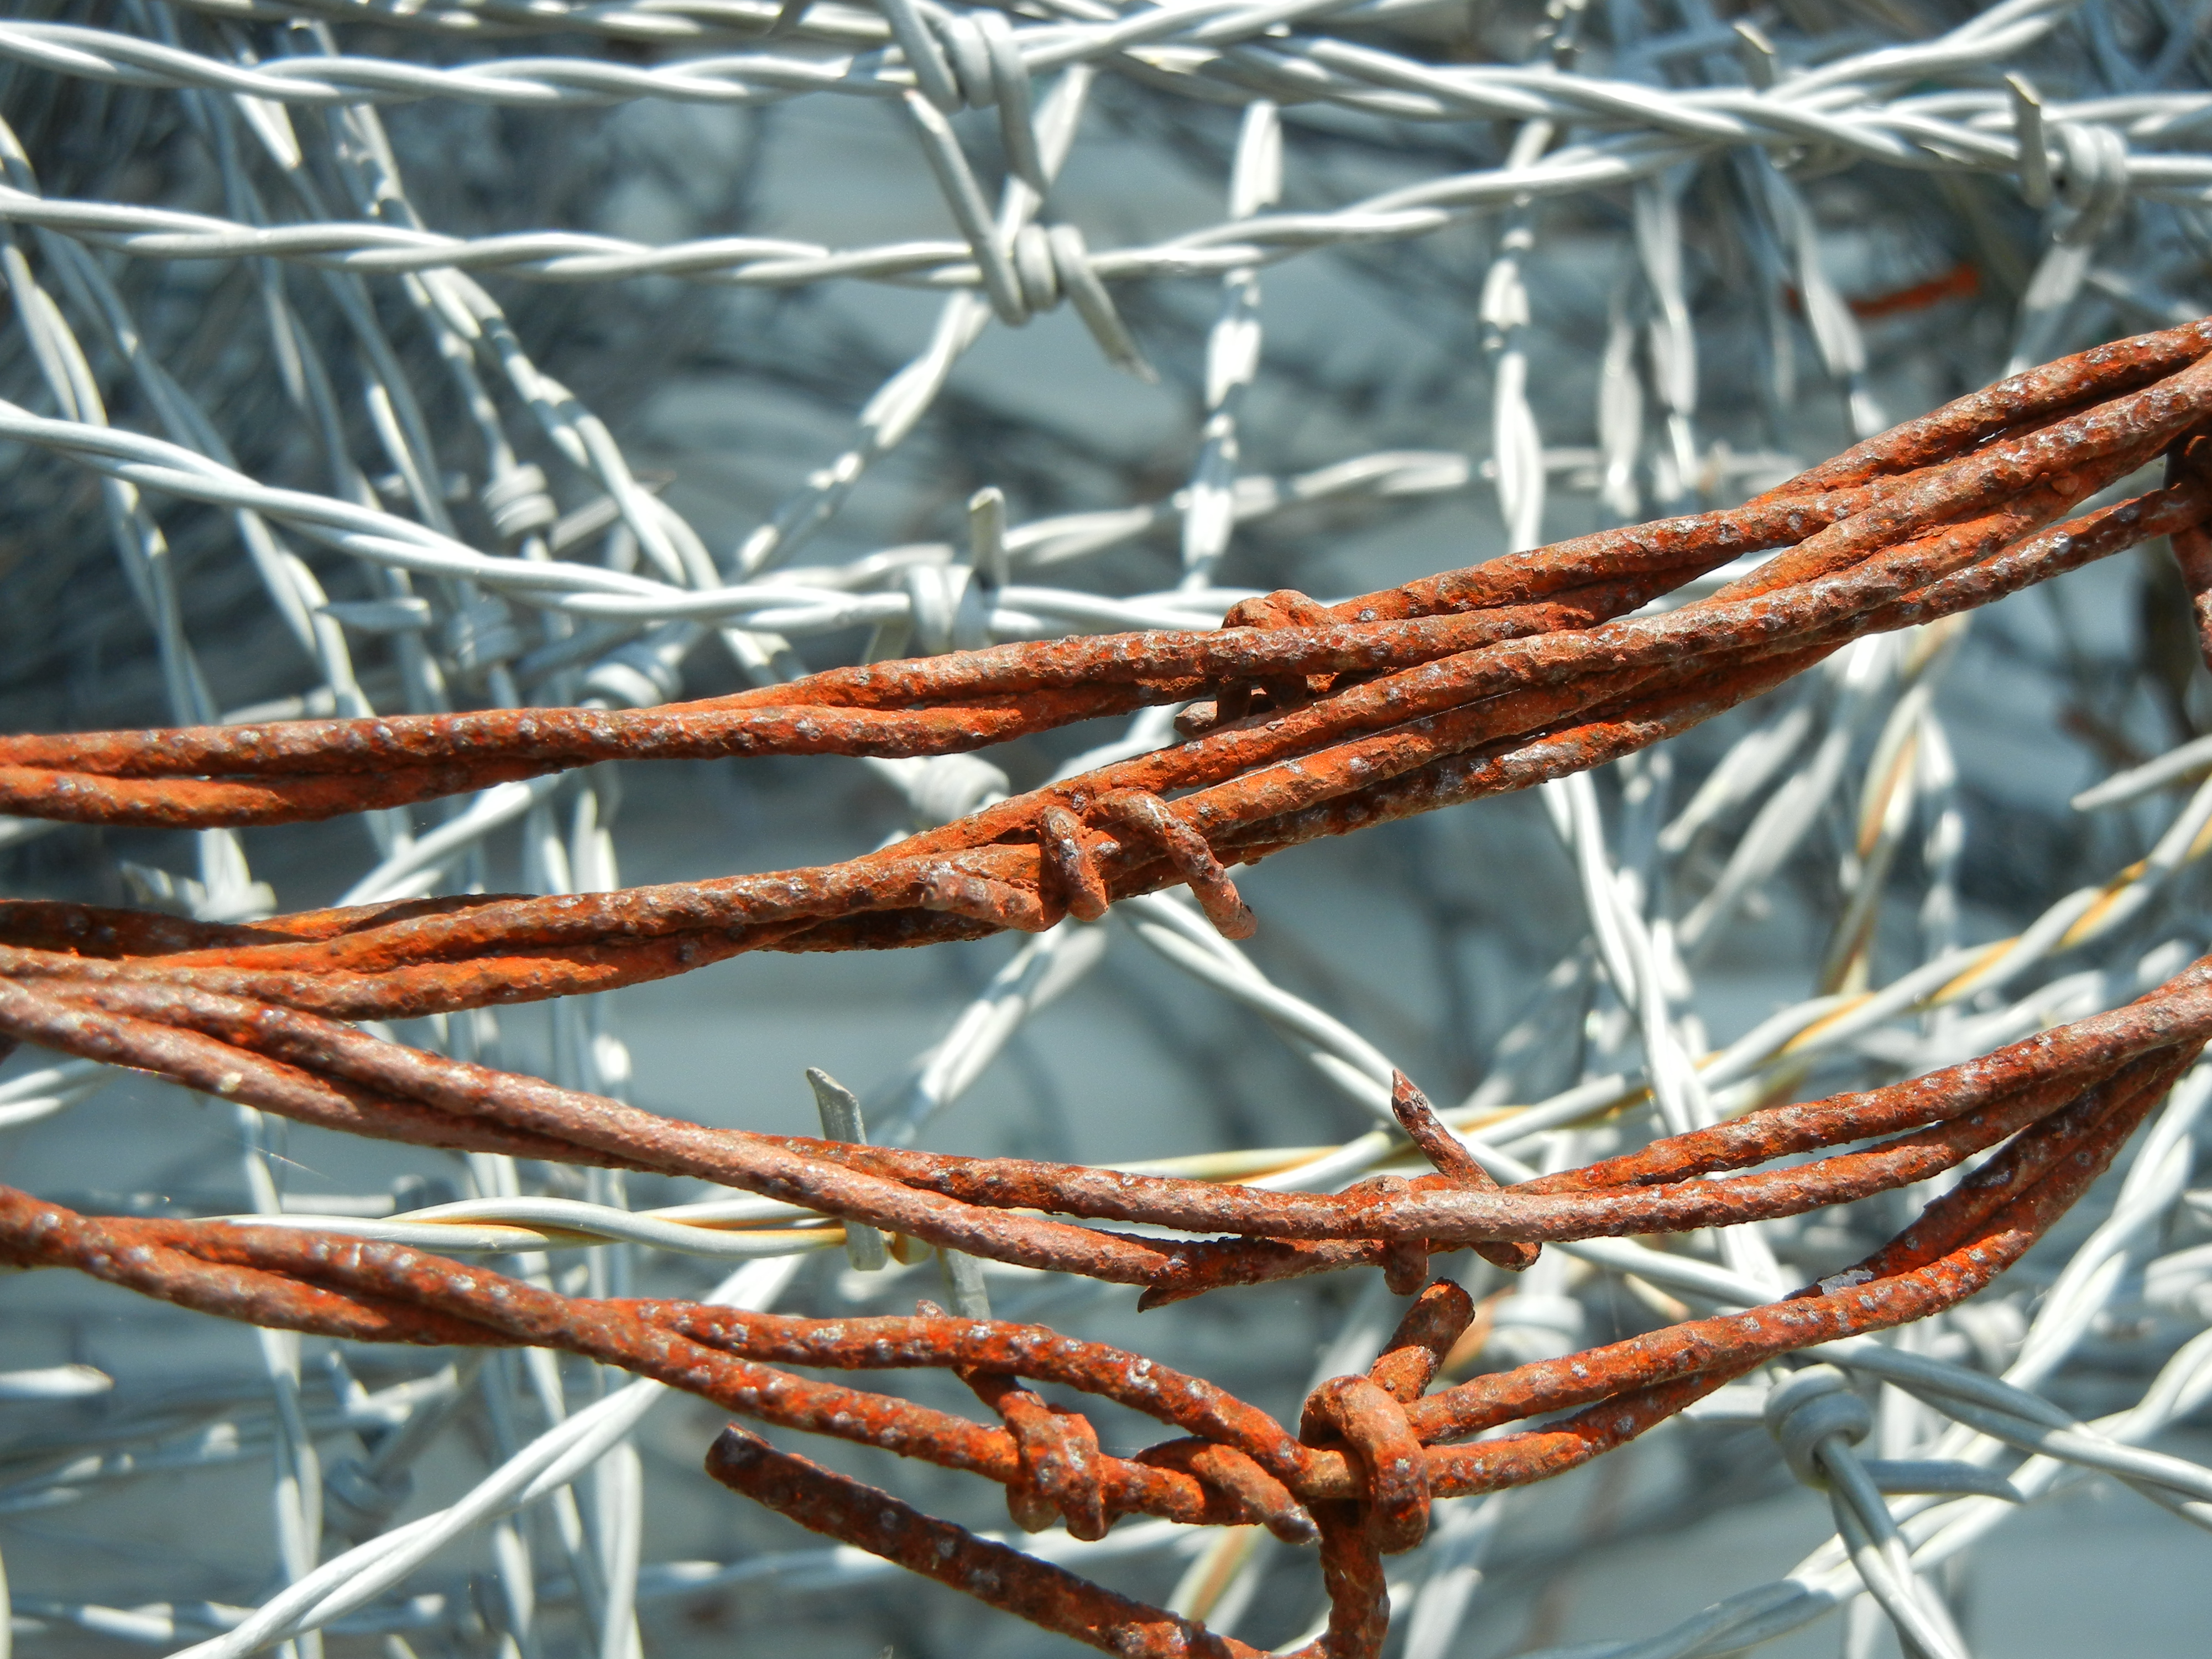 File:Rusty Barbed Wire.jpg - Wikimedia Commons